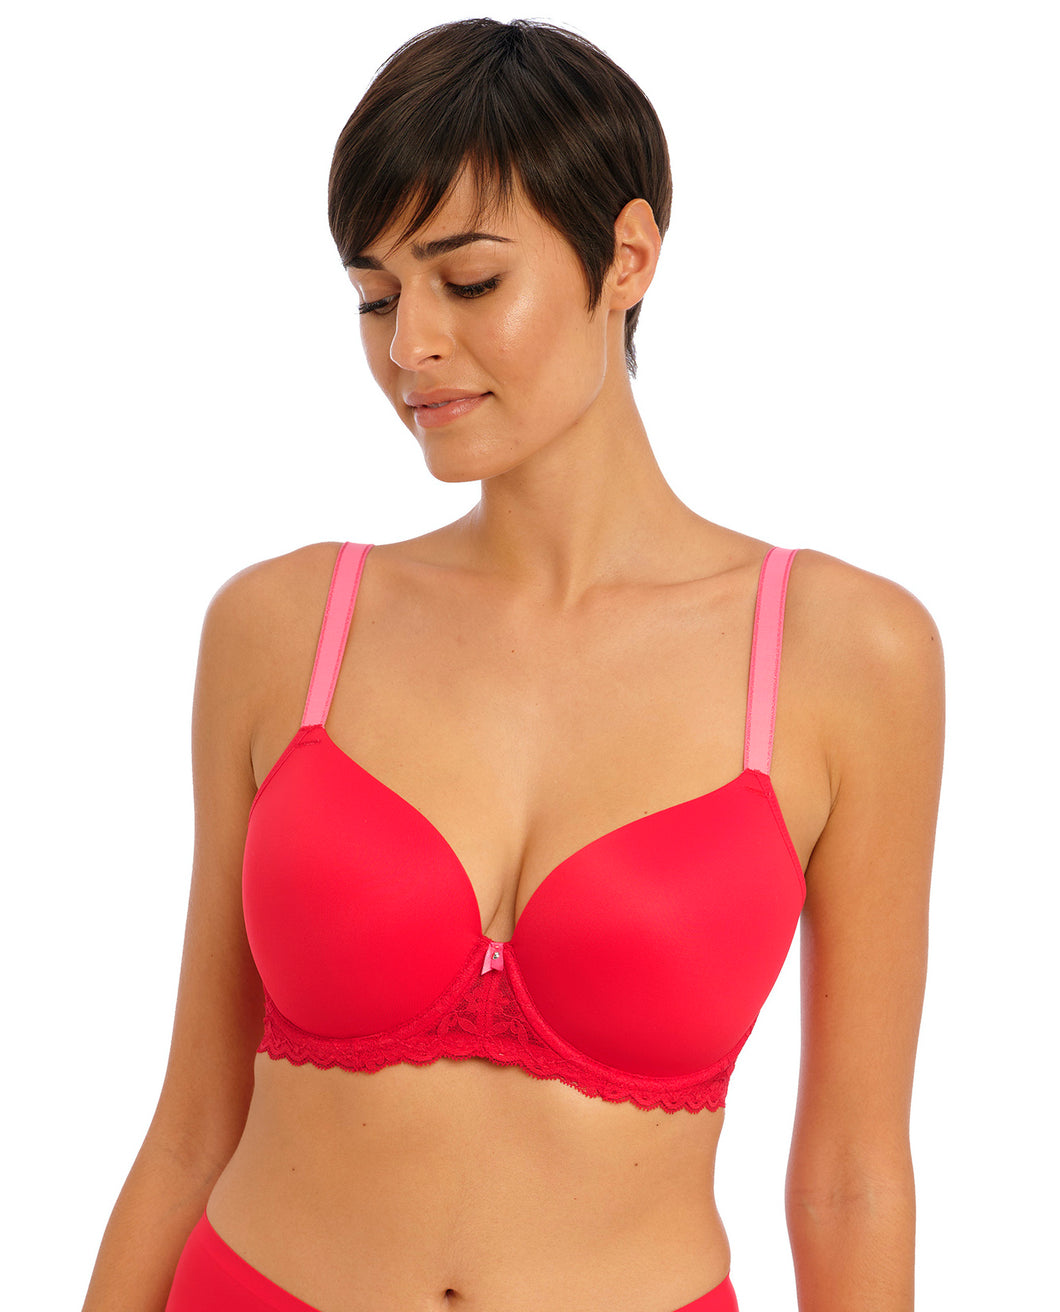 Offbeat AA5450 Uw Moulded Bra - Fashion / Chilli Red